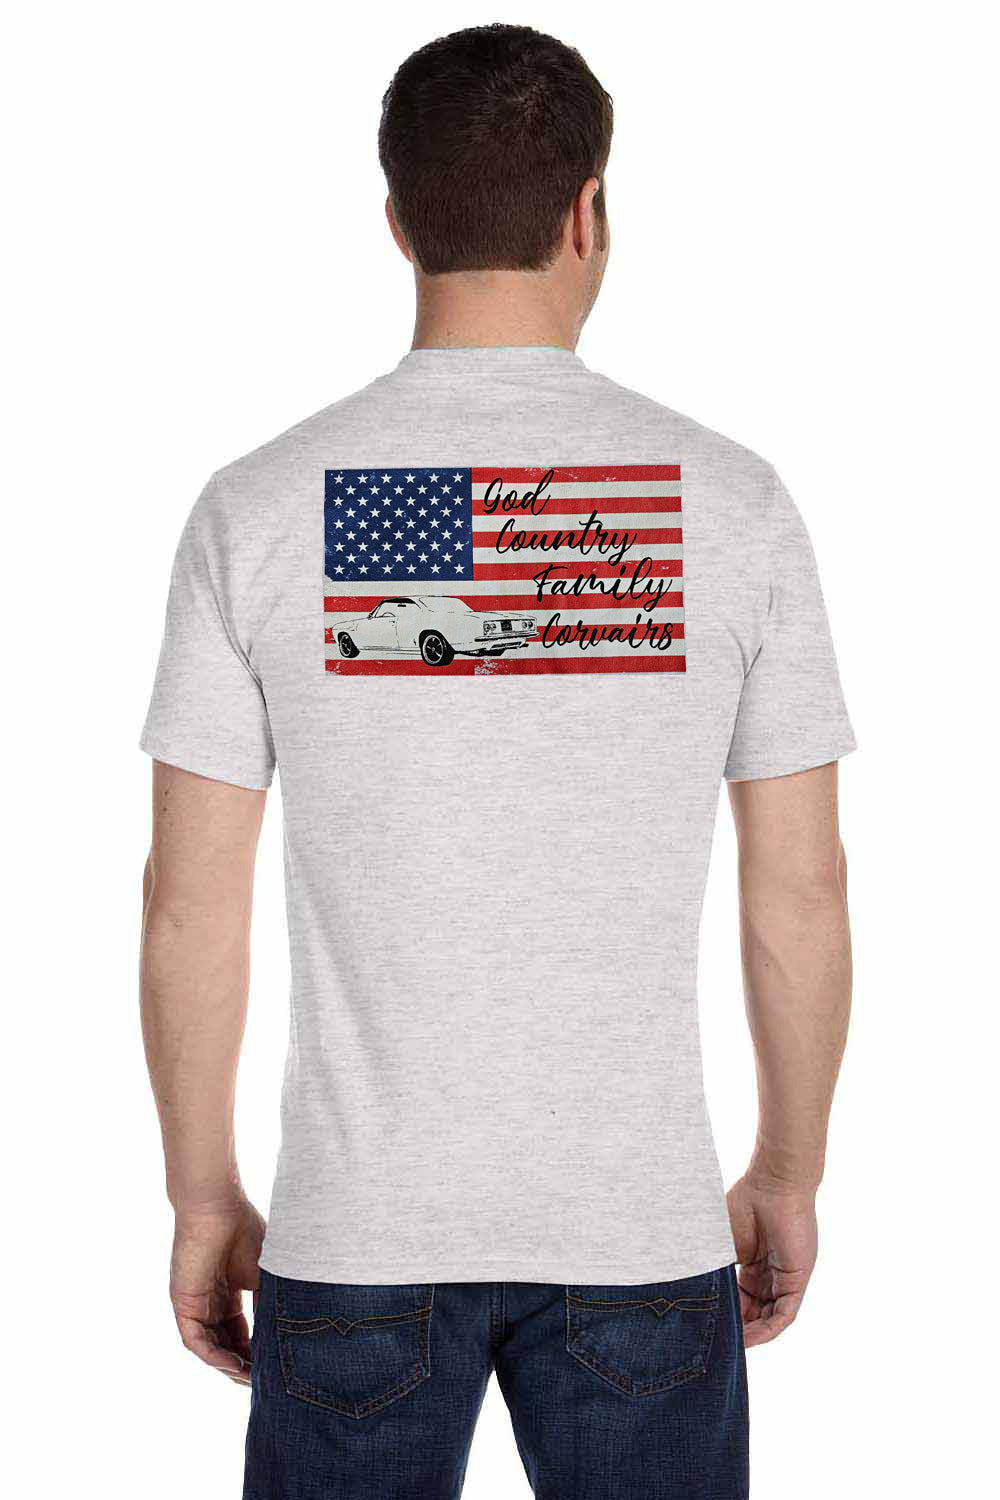 Short sleeve "God, Country, Family, Corvairs" t-shirt